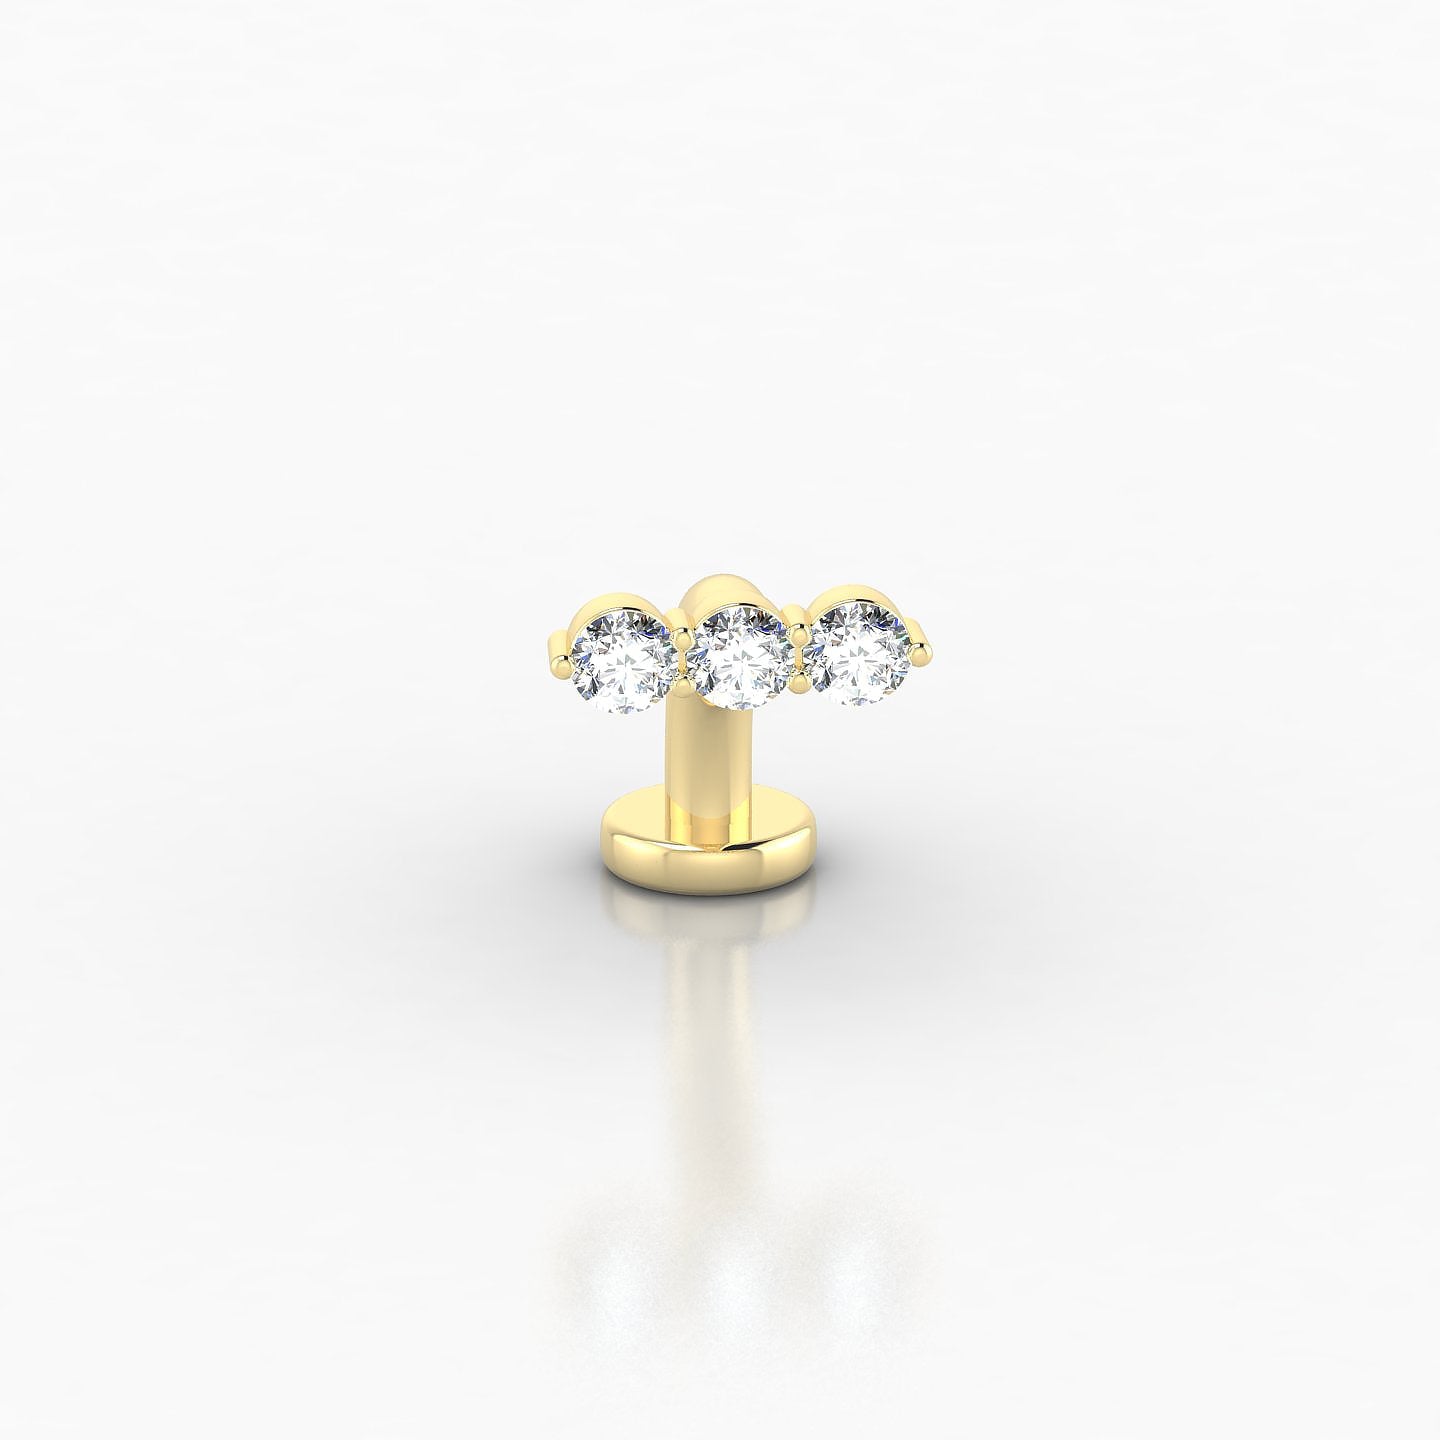 Ma'at | 18k Yellow Gold 8 mm 7.5 mm Trilogy Diamond Floating Navel Piercing